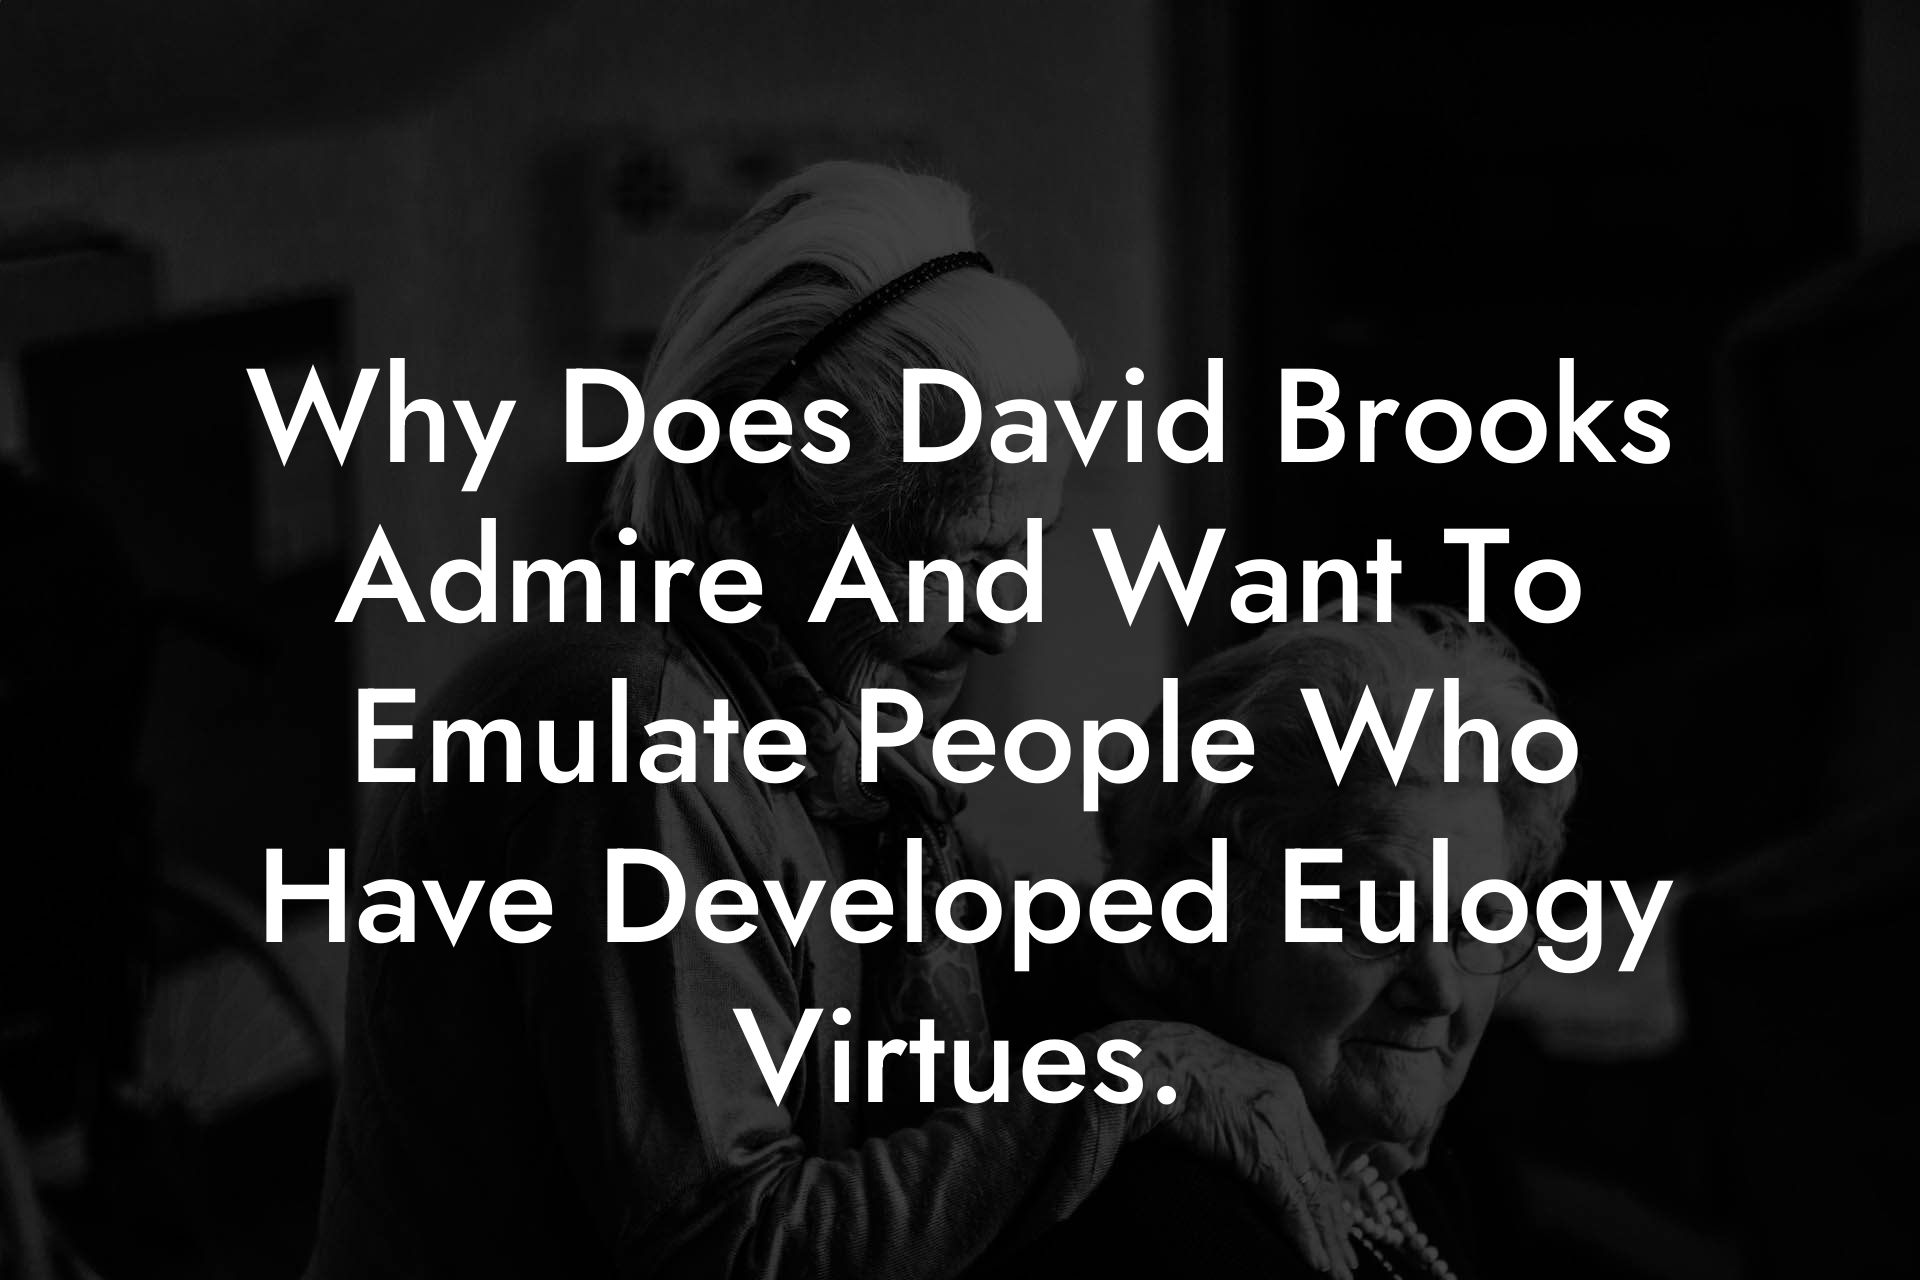 Why Does David Brooks Admire And Want To Emulate People Who Have Developed Eulogy Virtues.